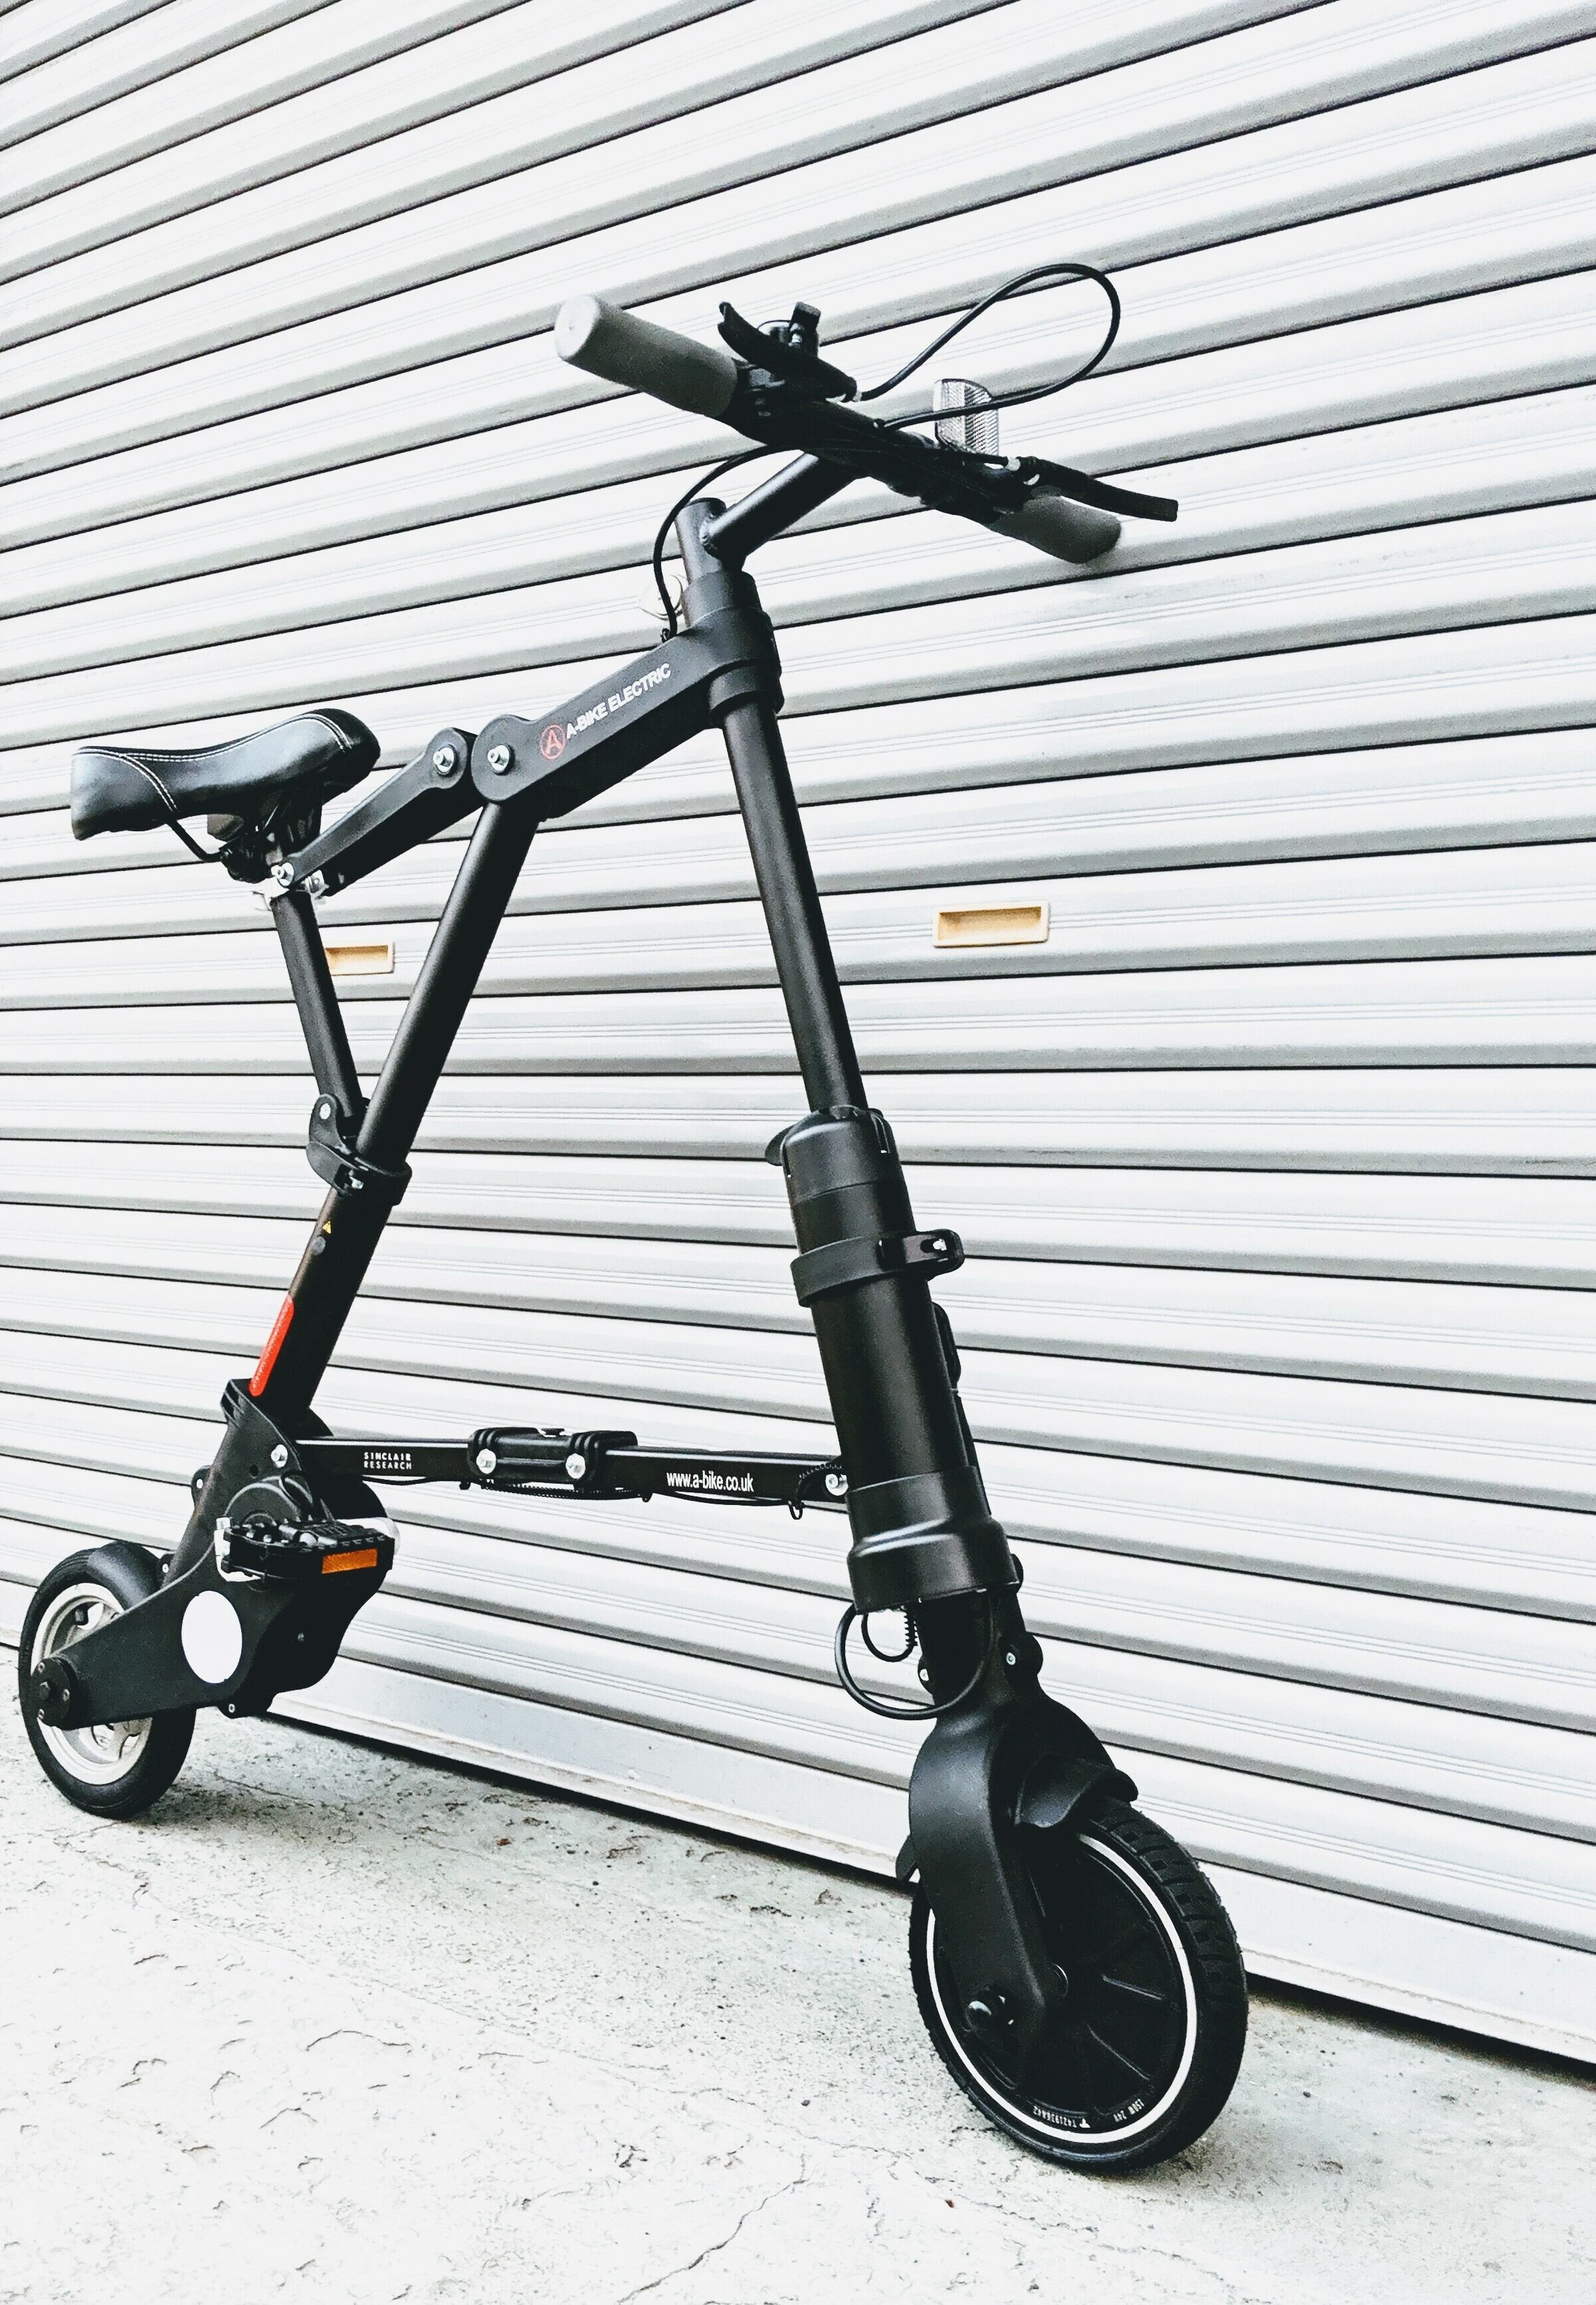 SINCLAIR RESEARCH A-BIKE ELECTRIC 正規販売 超軽量 コンパクト 